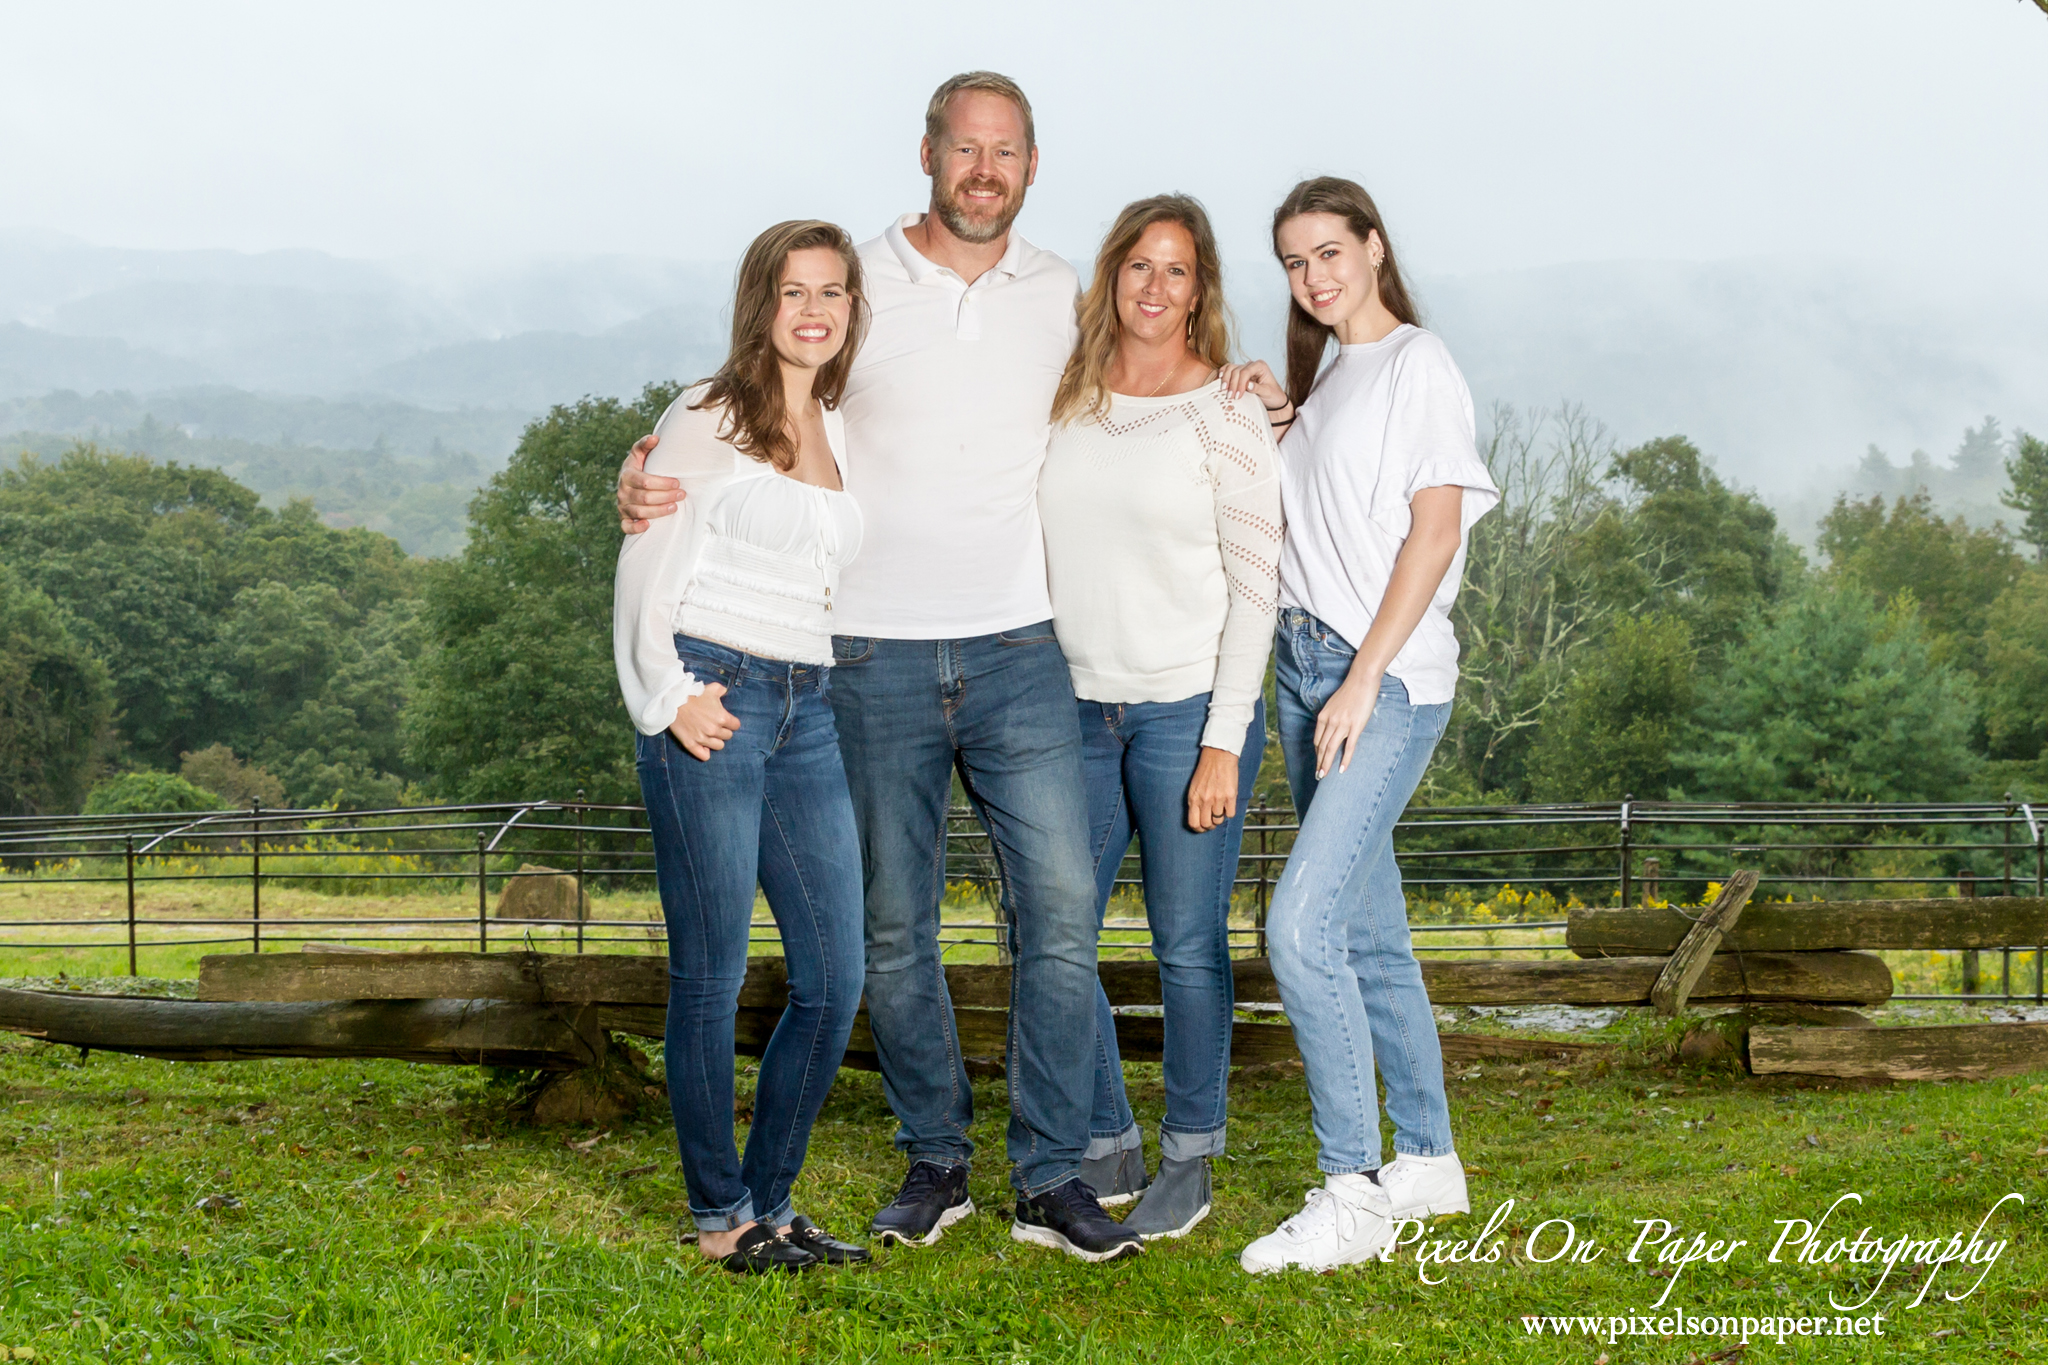 Waters Family Outdoor Fall Portrait Photography Pixels On Paper Photographers Blowing Rock NC photo